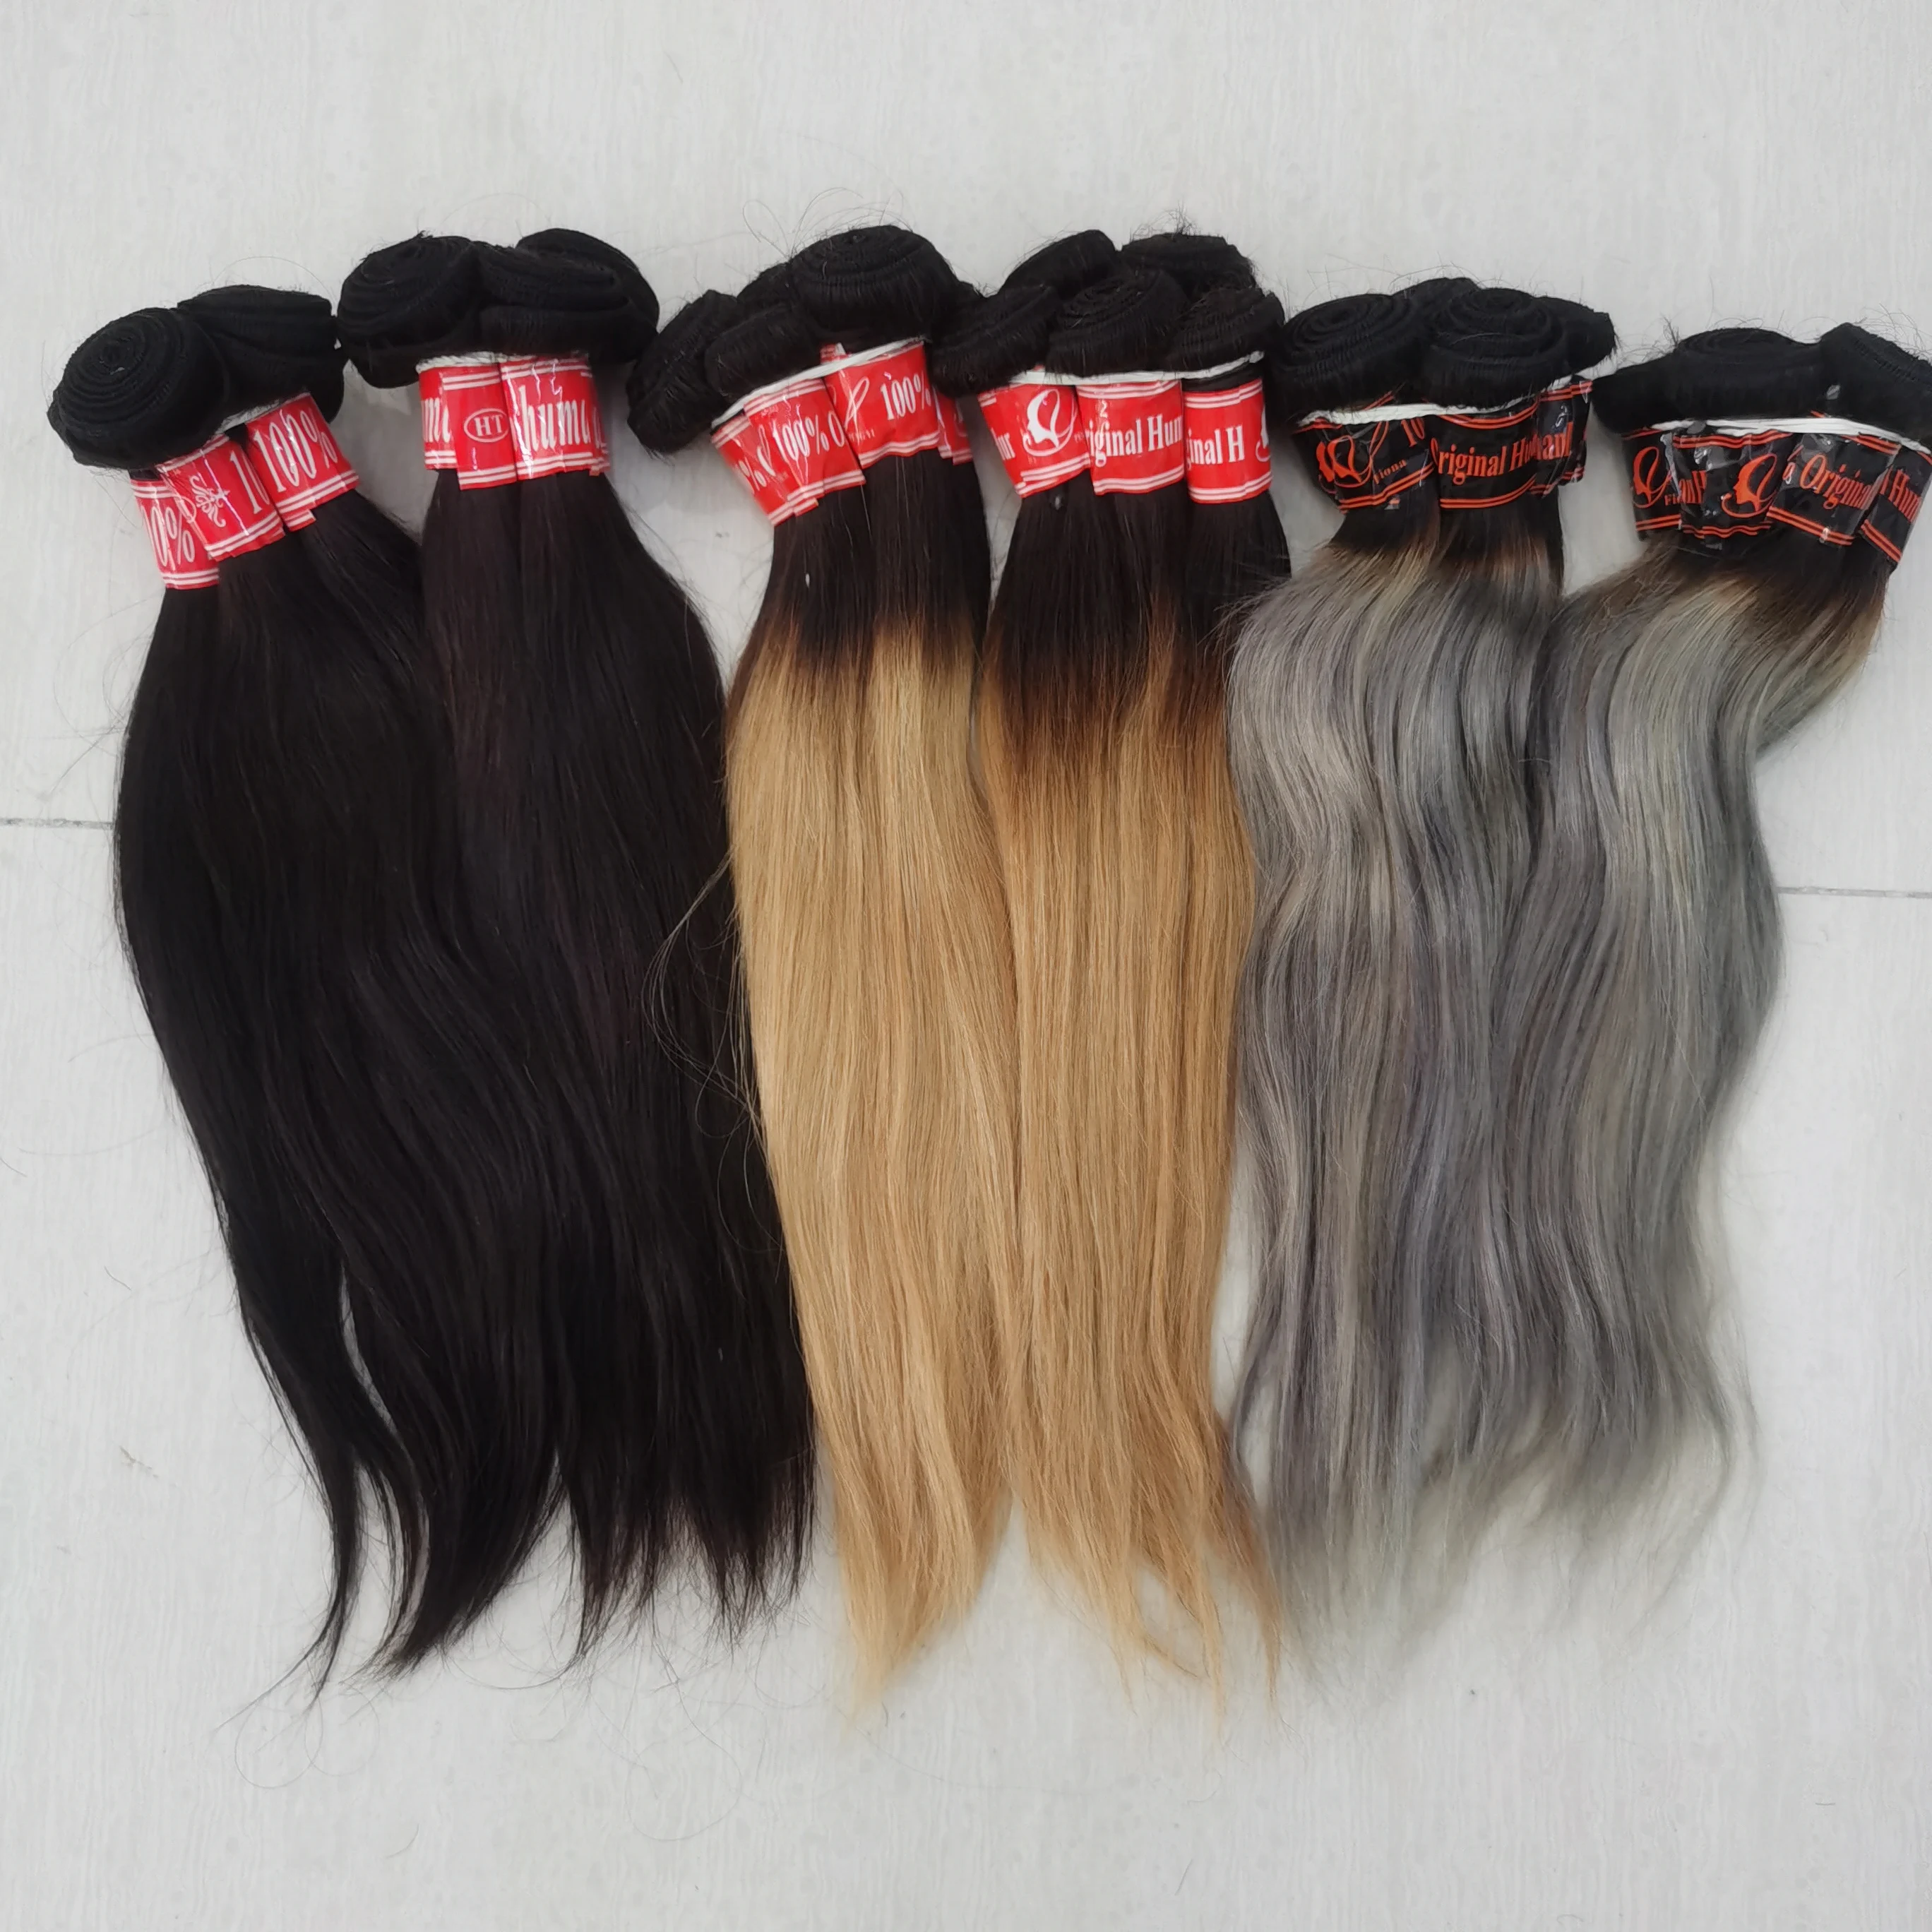 

Letsfly Straight 14 Inches Virgin Human Hair Bundles Ombre Color Dark Roots Brazilian Hair Bundles Weft Free Shipping